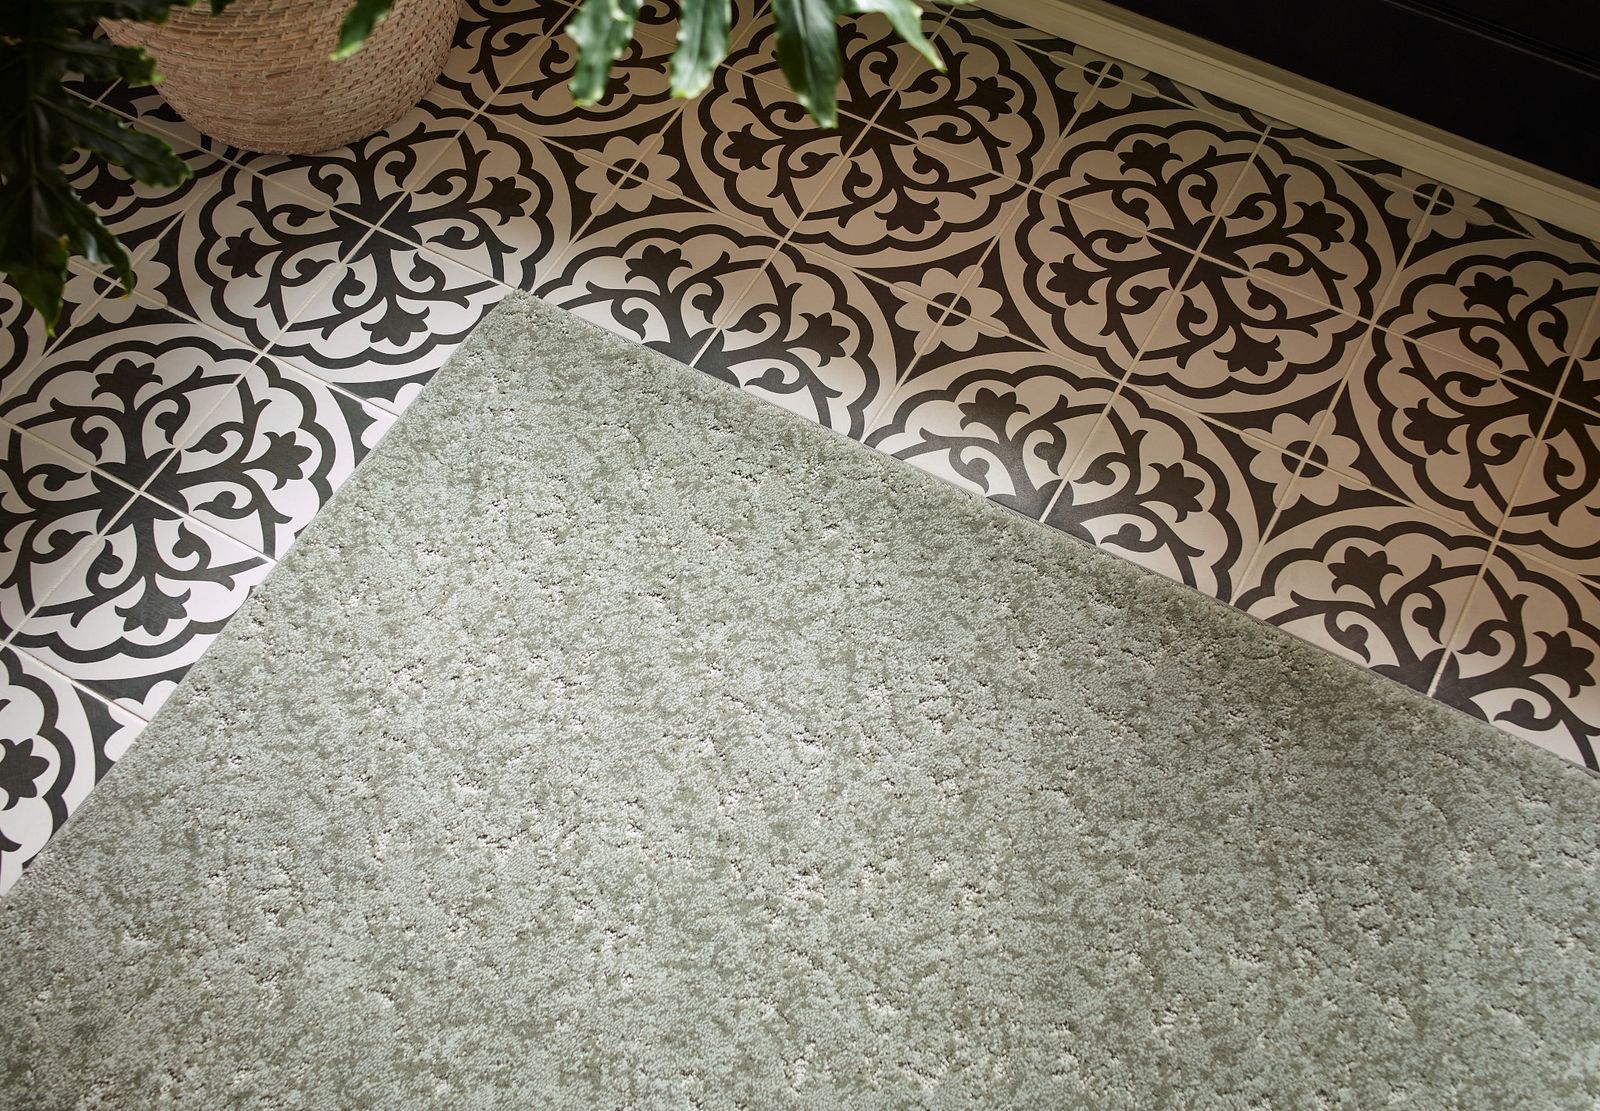 How to Clean & Store Your Area Rug